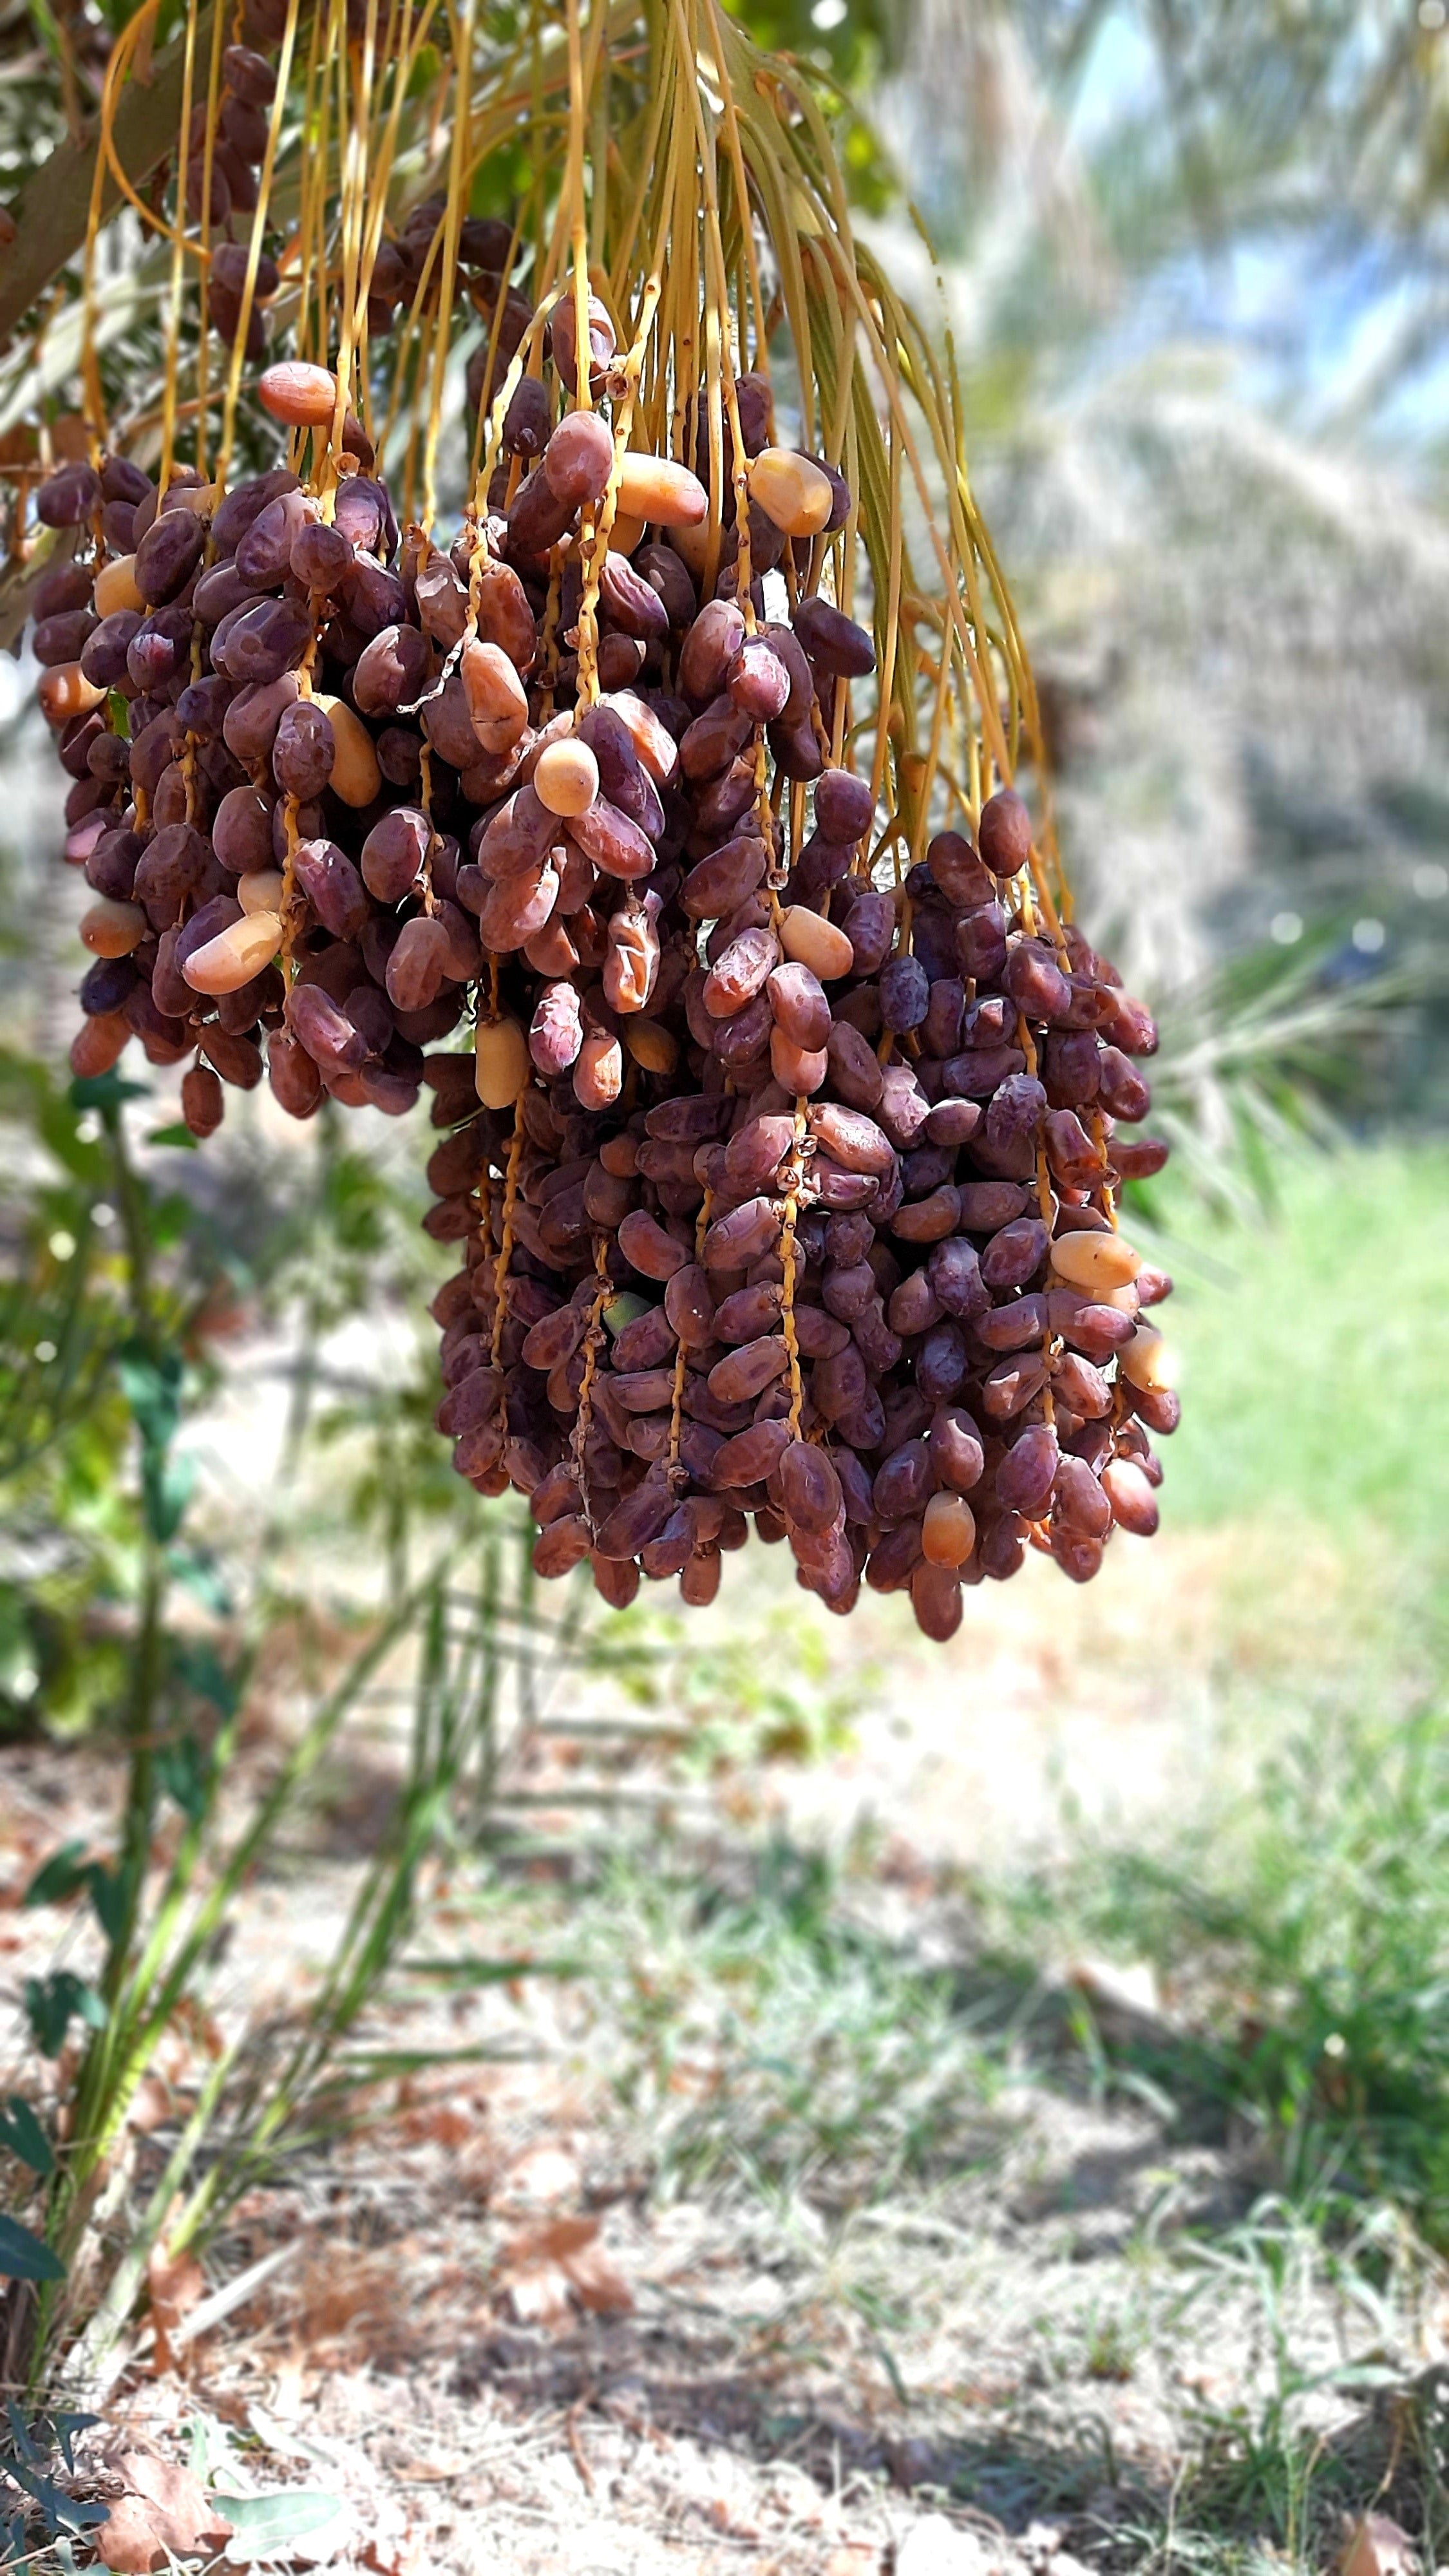 Dates on the tree hanging down.